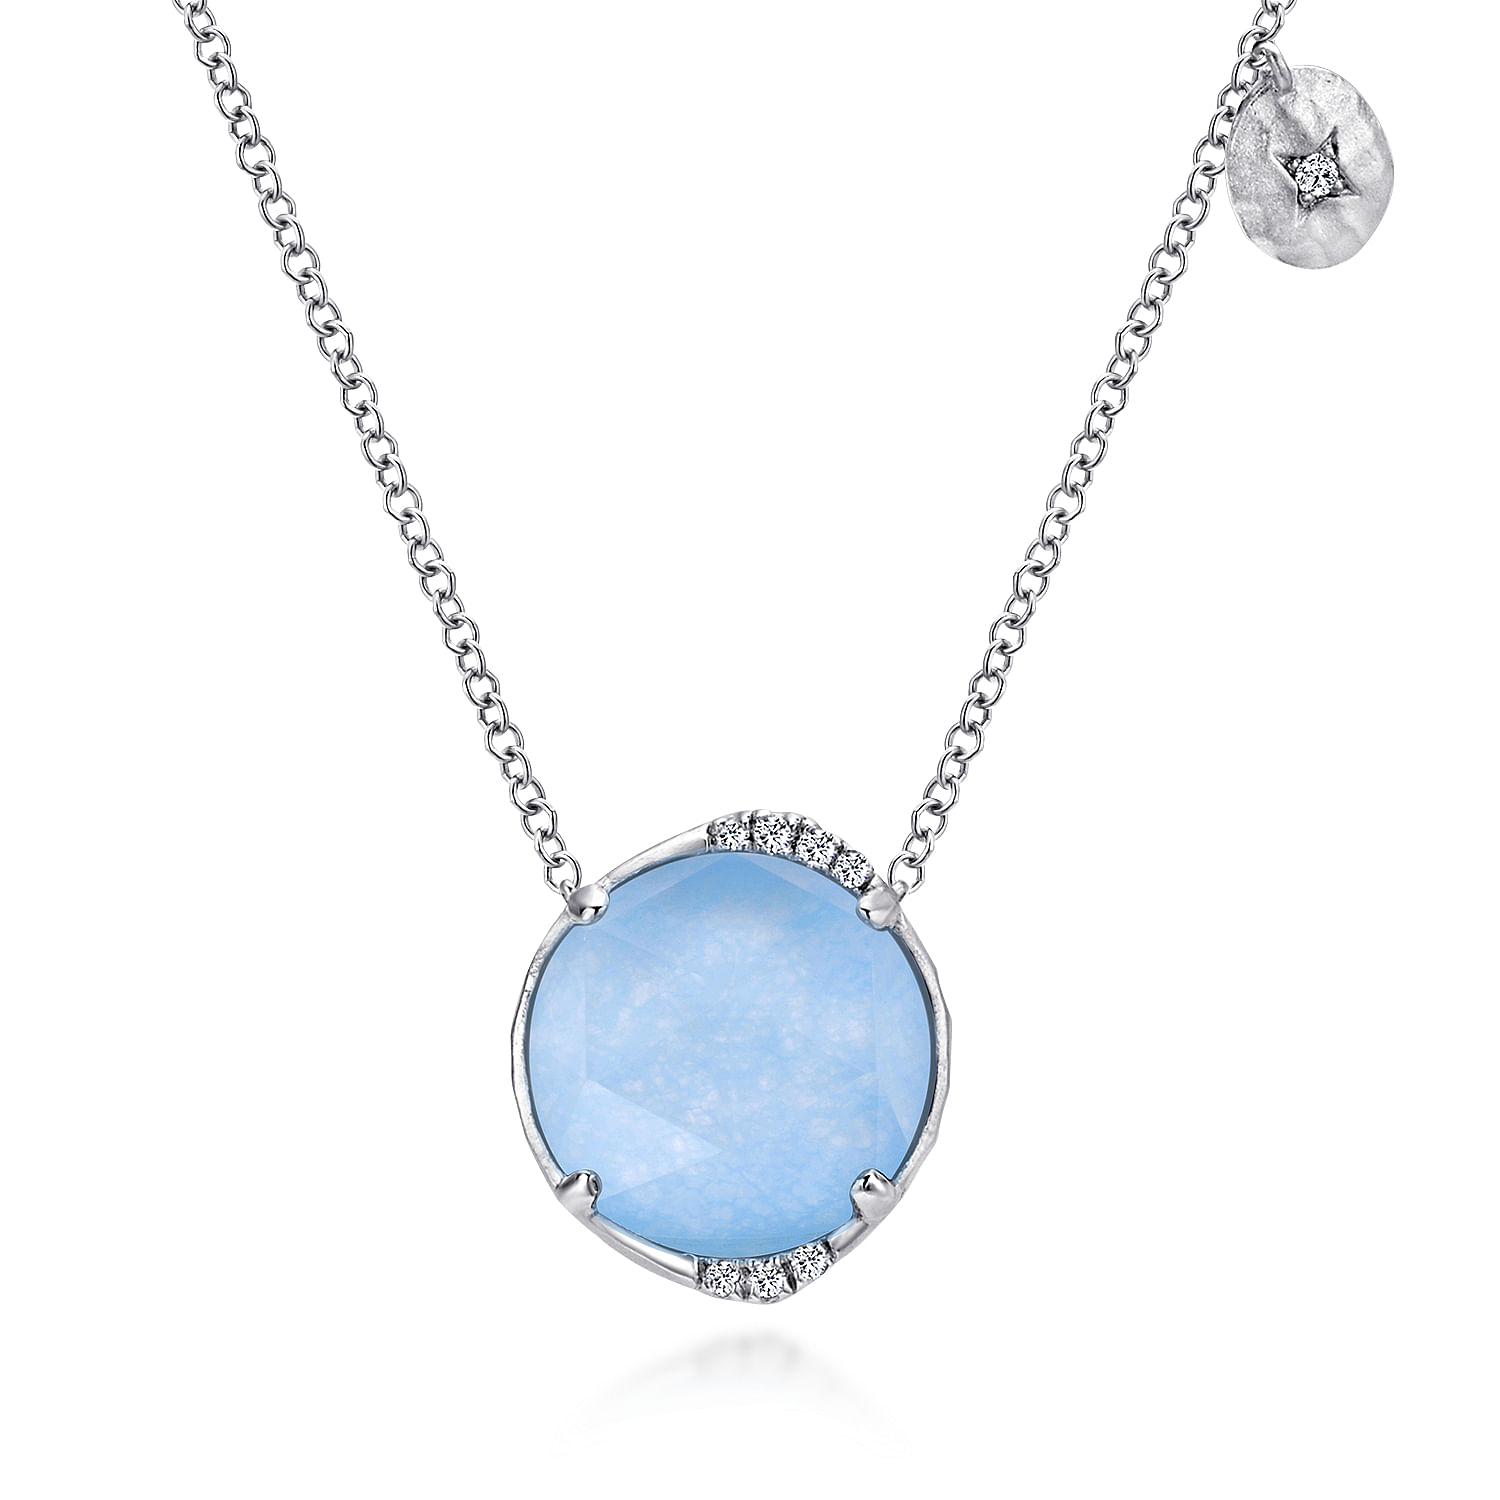 925 Sterling Silver Rock Crystal/Blue Jade and Diamond Pendant Necklace